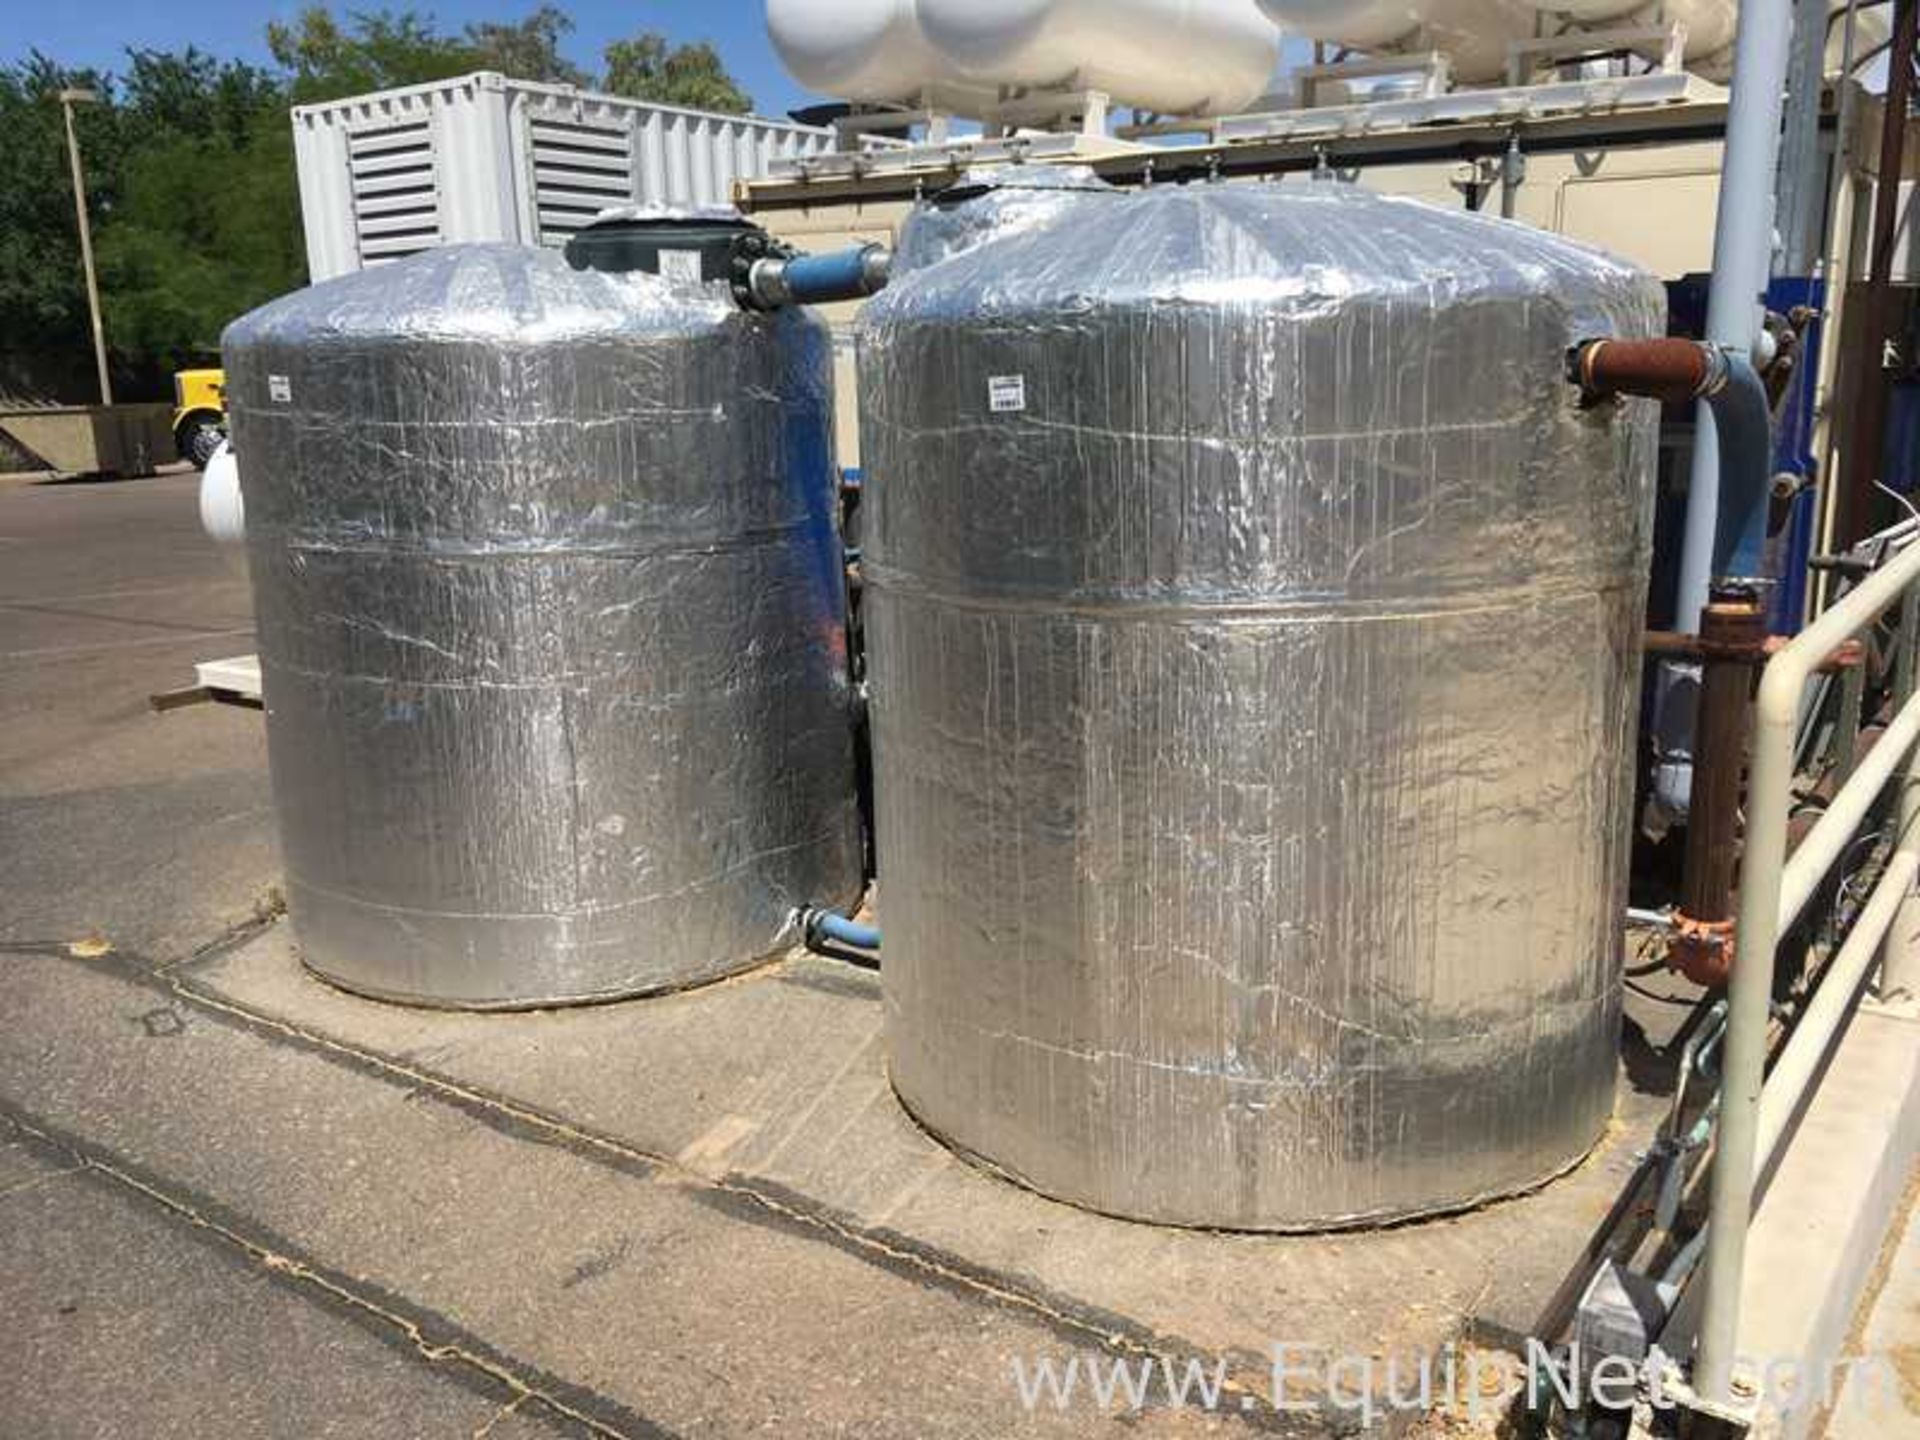 Lot of 2 each 1,000 Gallon Insulated Poly Tanks - Image 2 of 4